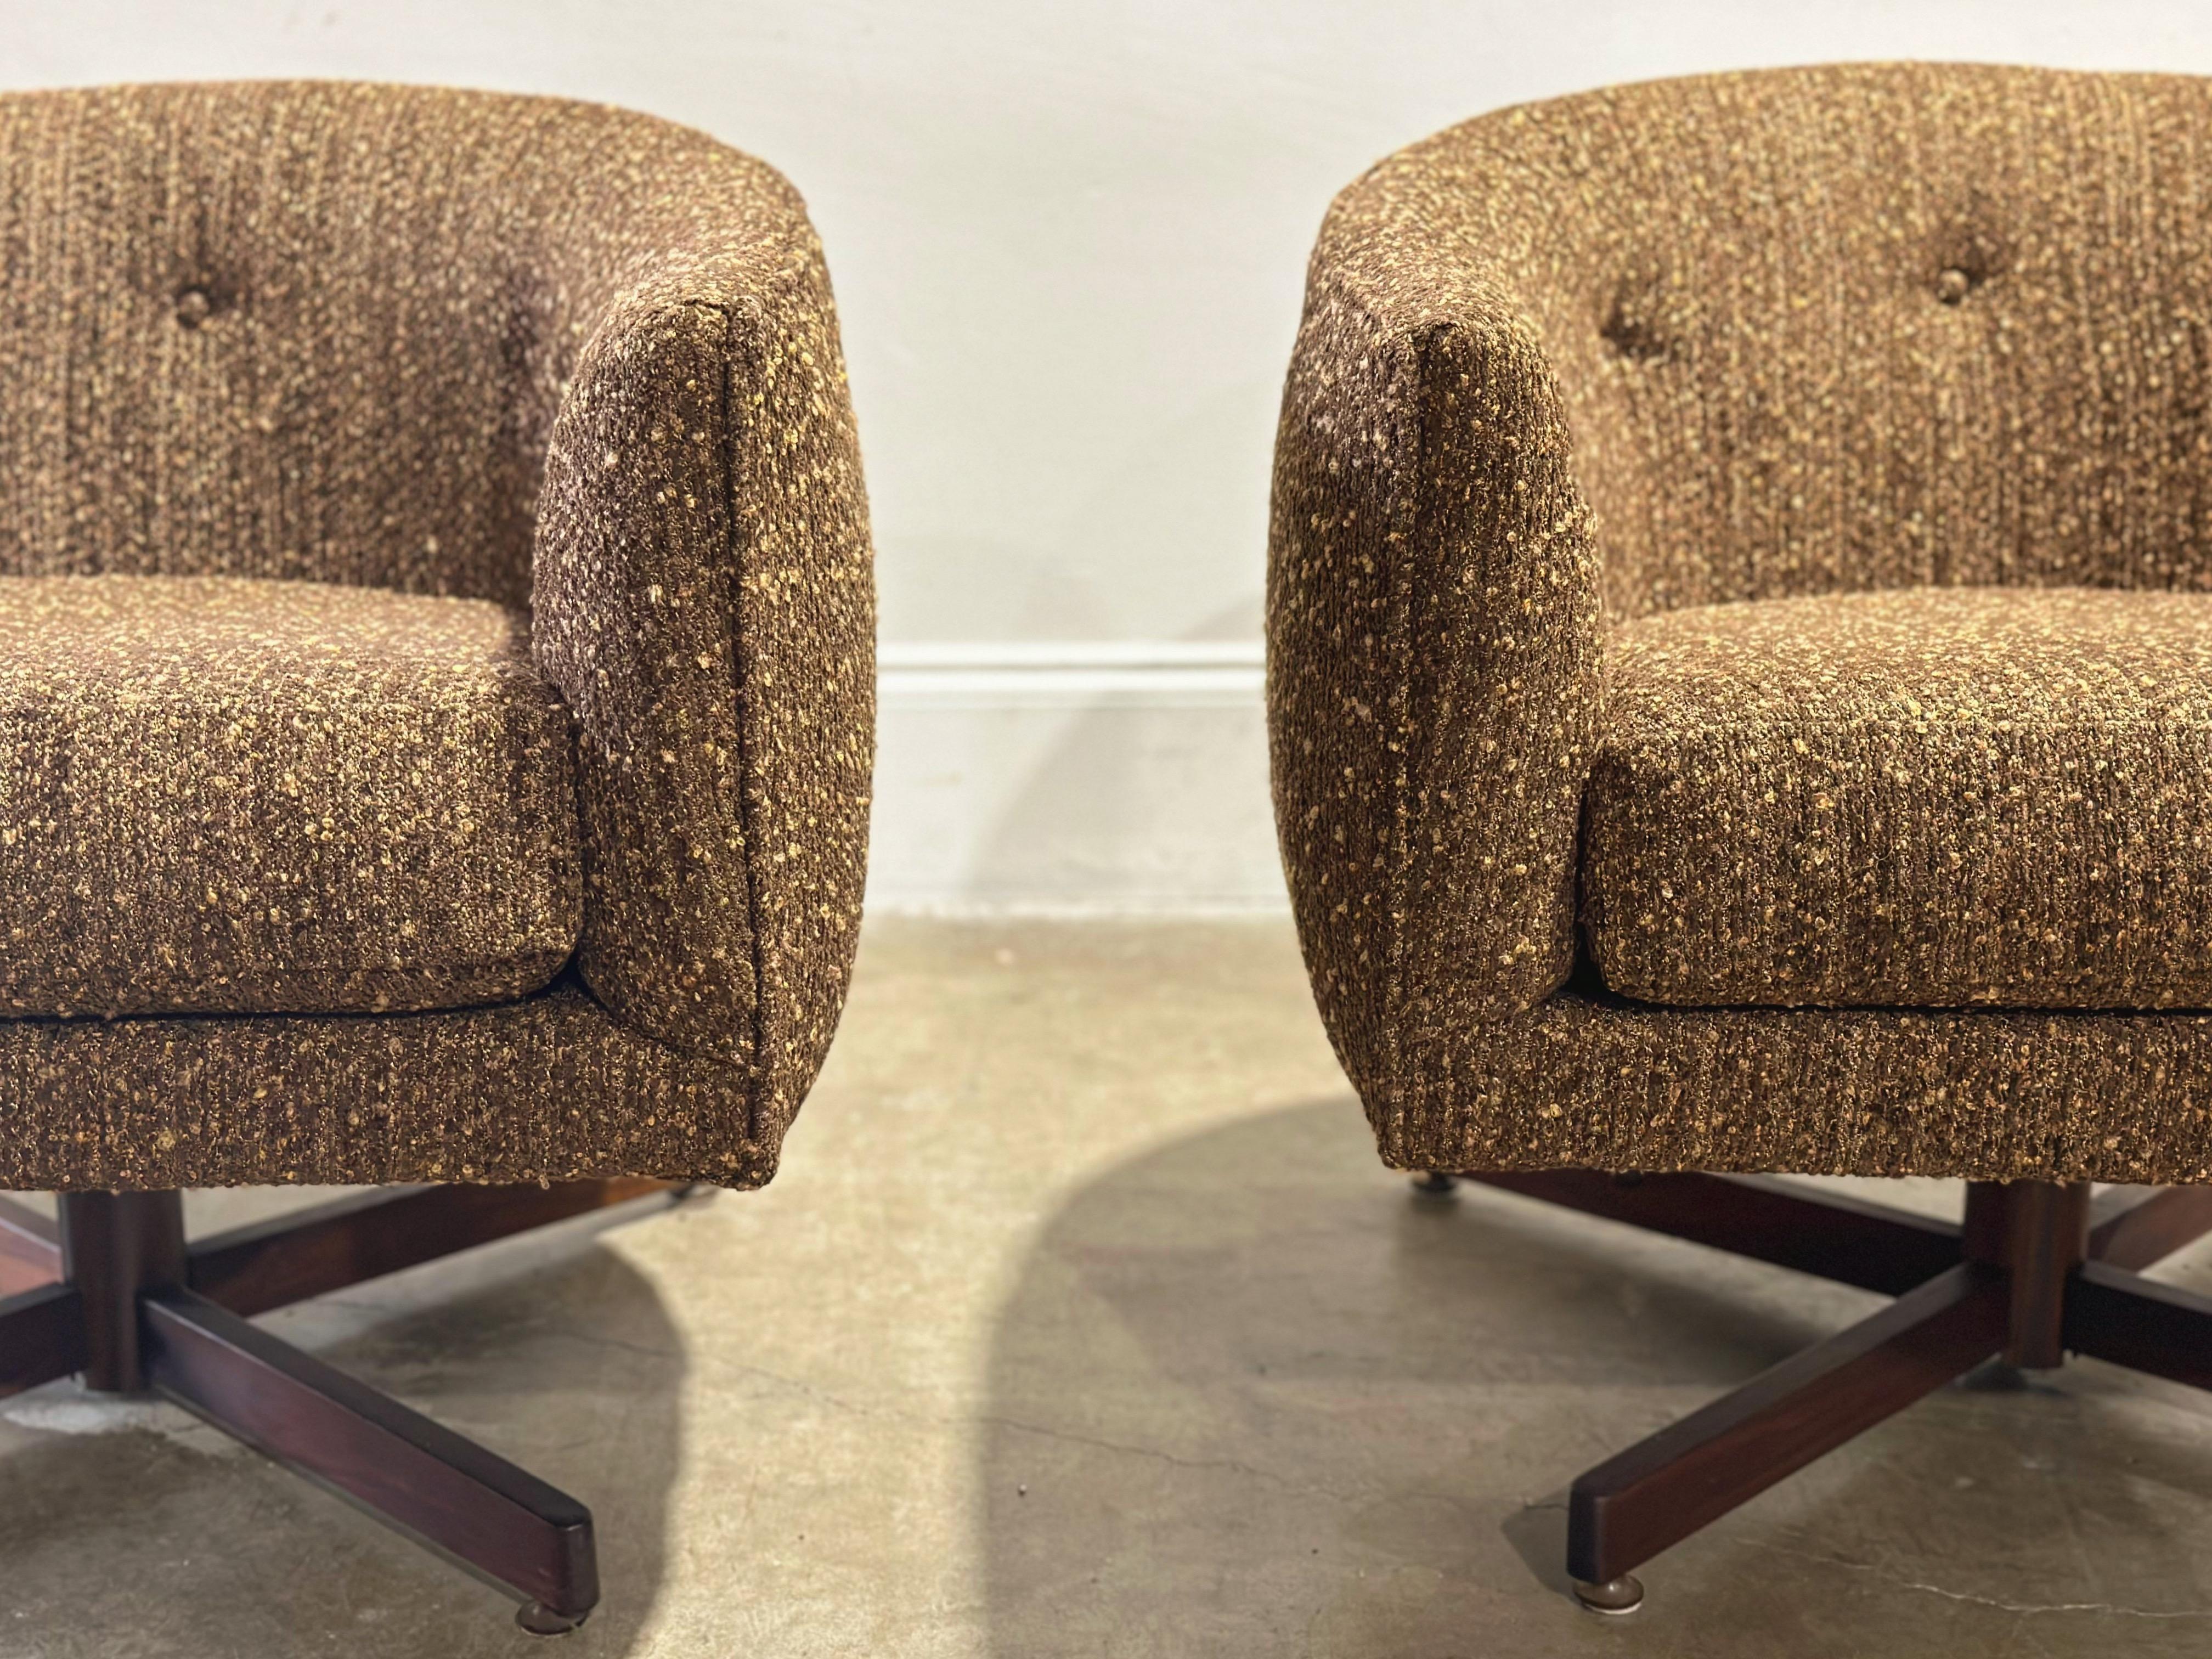 Pair of midcentury modern barrel loungers by Milo Baughman for Thayer Coggin - on rare black walnut four spoke bases. 

swivel + rock + recline

Both chairs retain both Thayer Coggin labels

Fully restored by our in-house team. All new foam,